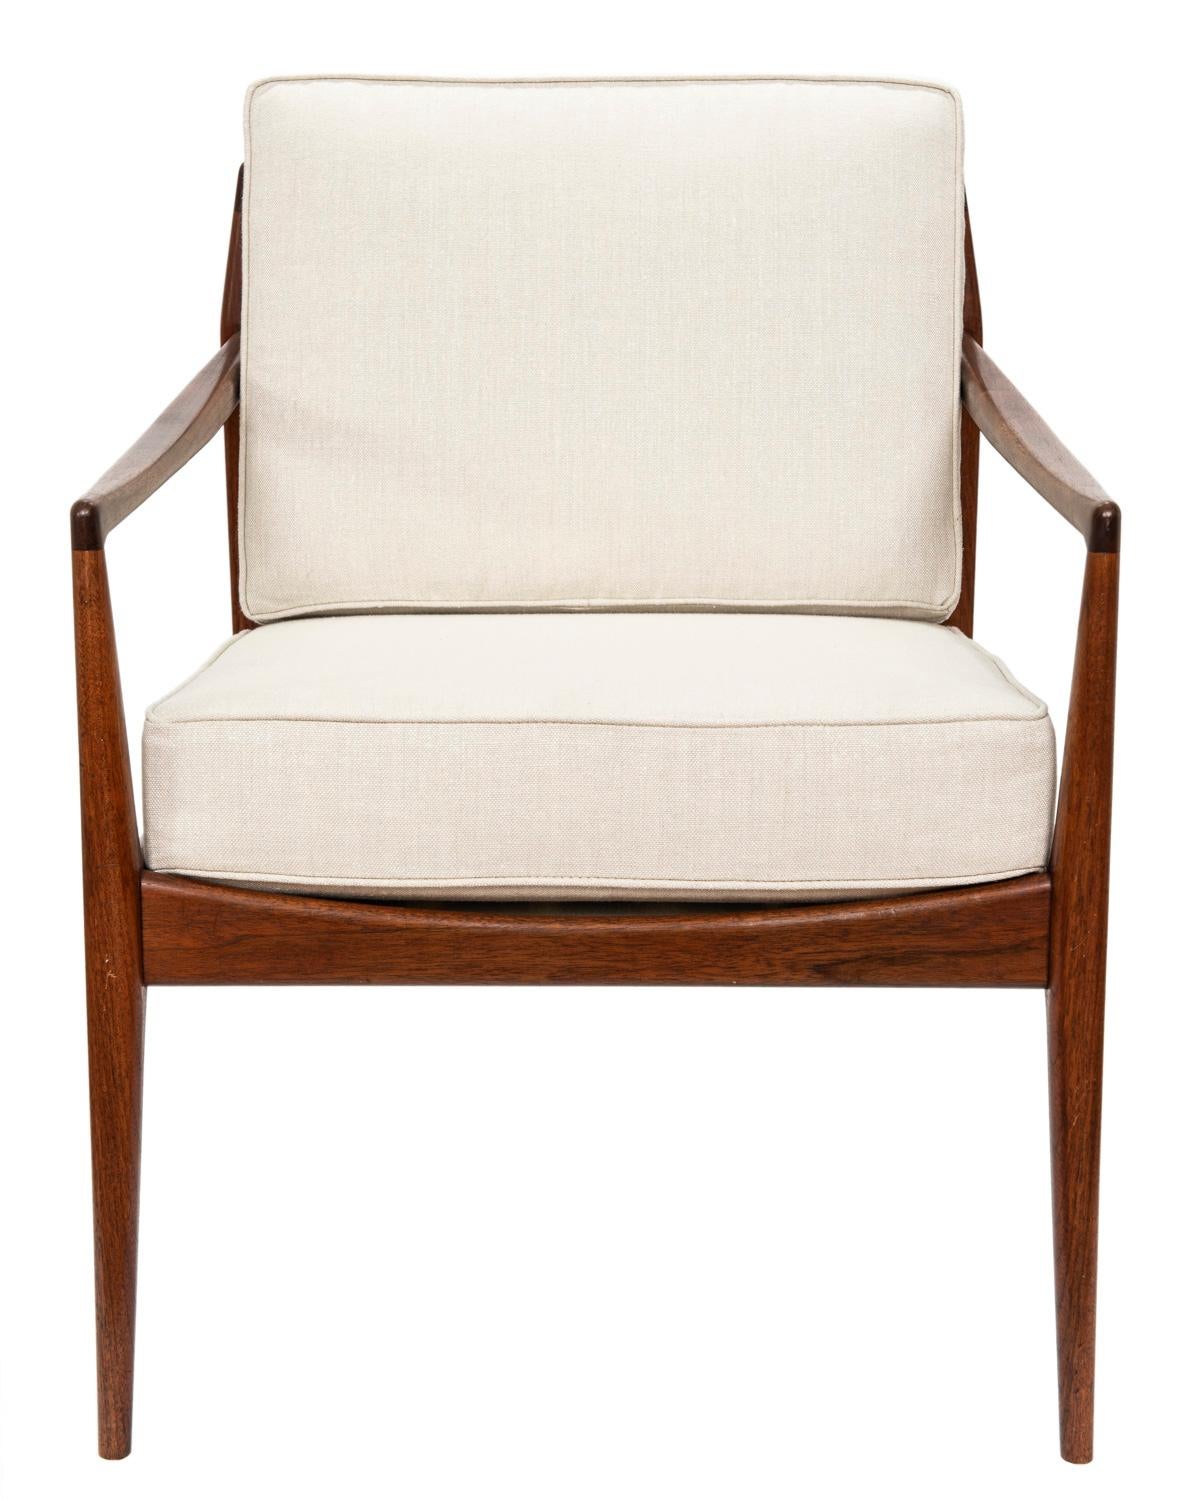 Hand-Crafted Pair of Teak Upholstered Armchairs Attributed to Ib Kofod-Larsen, circa 1960